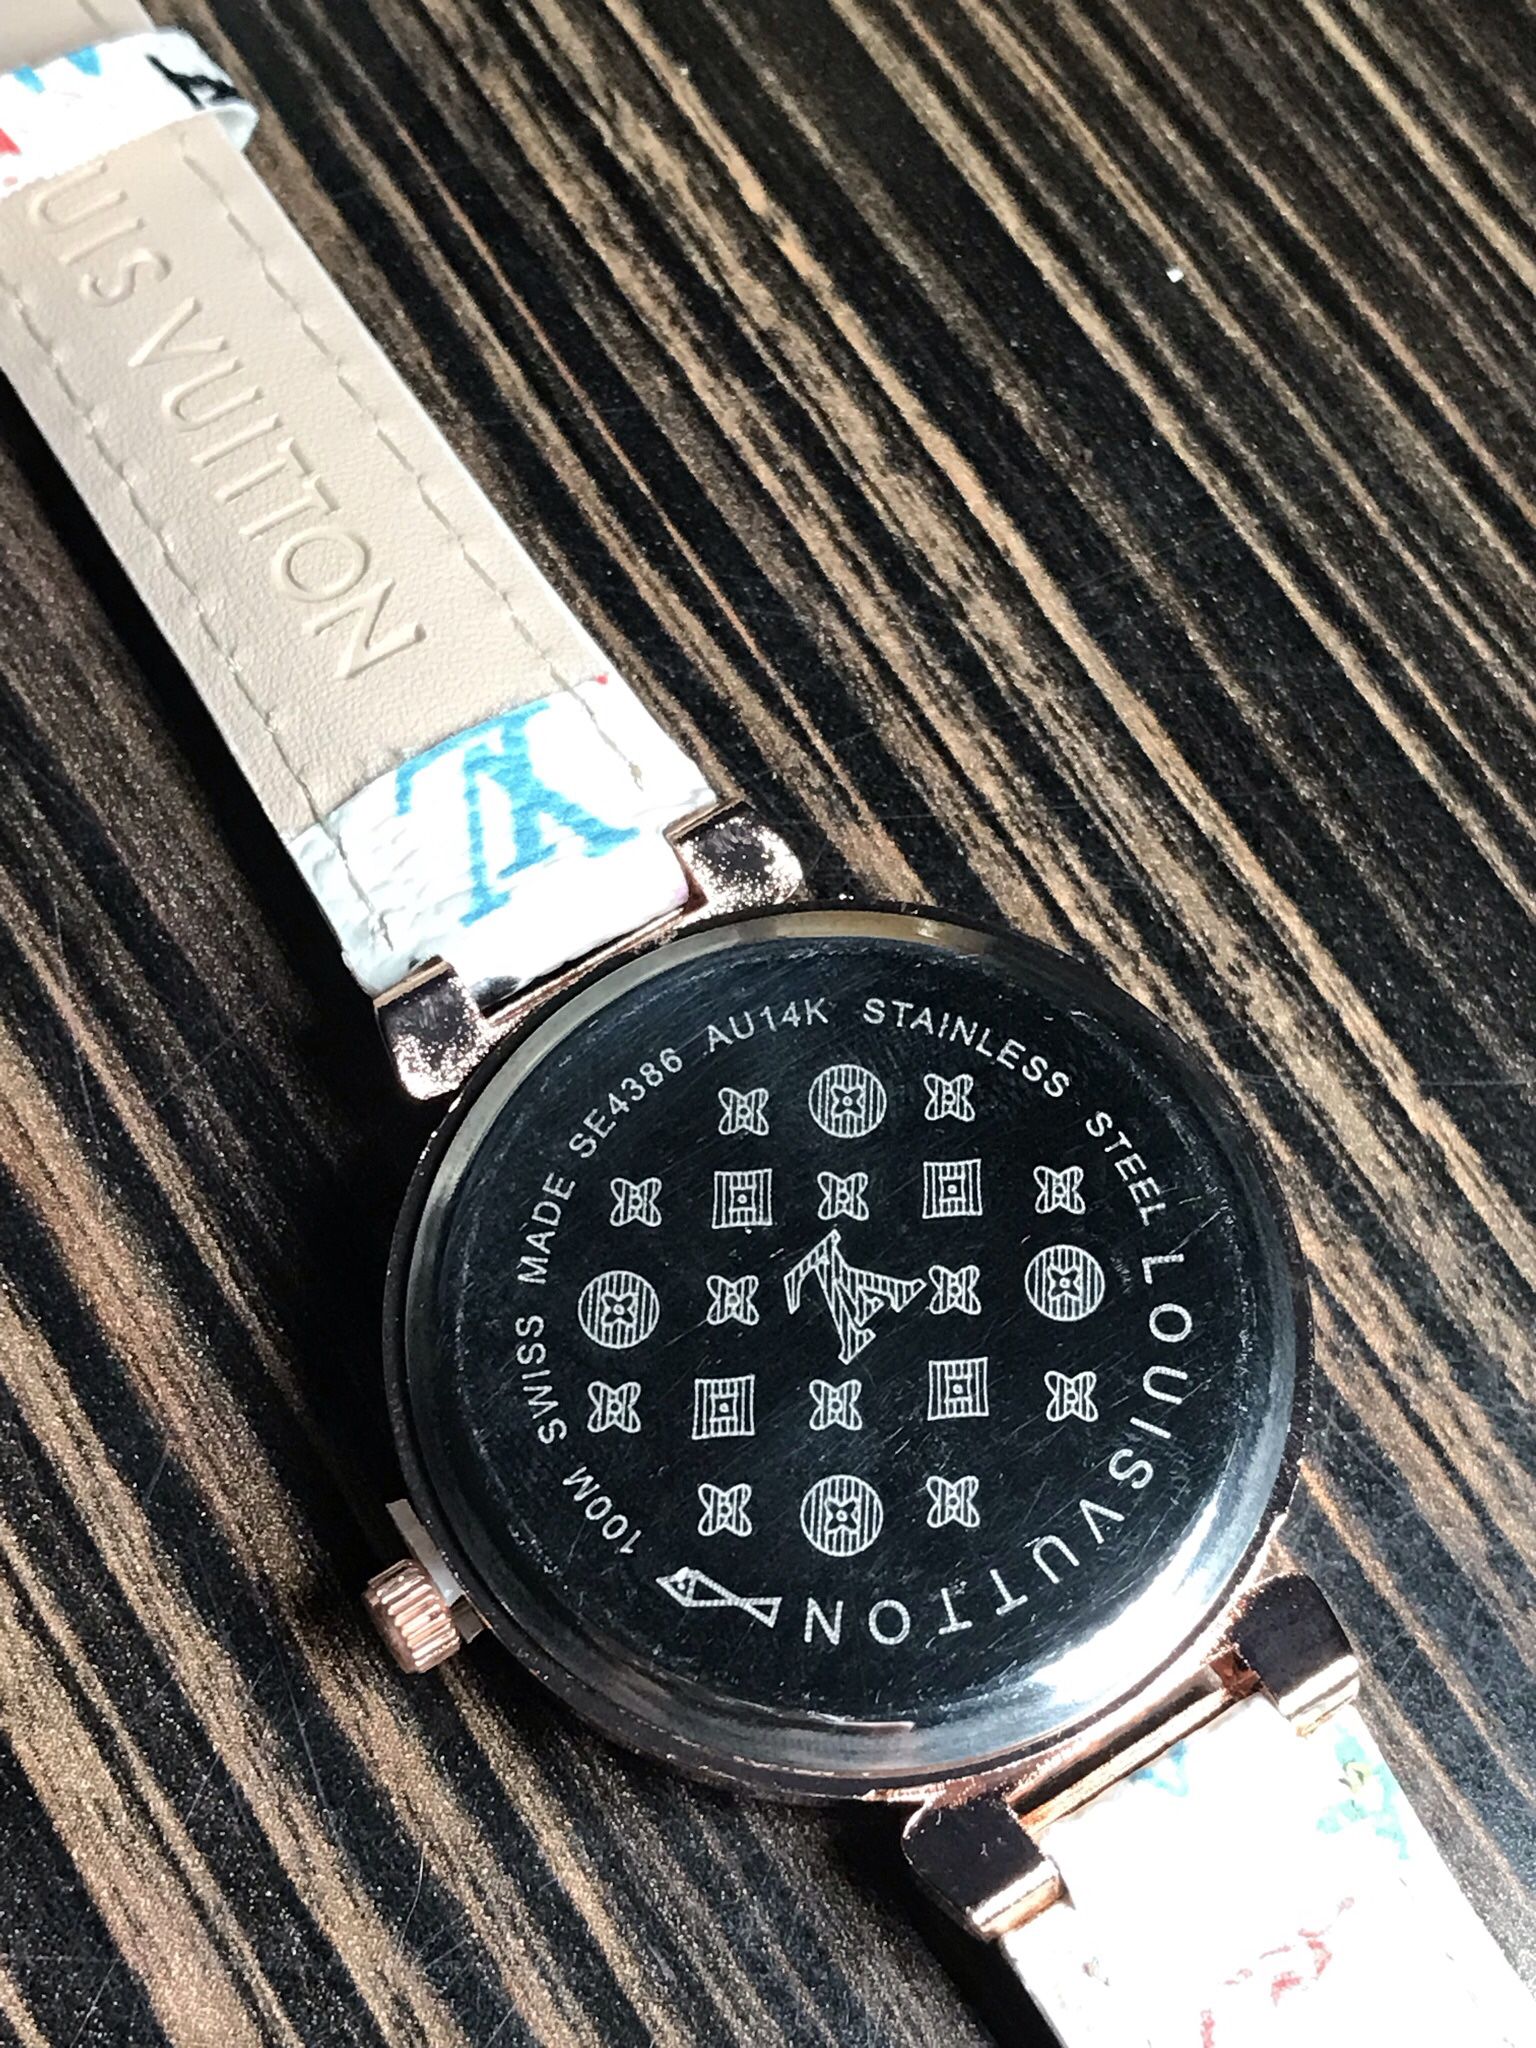 Louis vuitton lady watch for Sale in Stone Mountain, GA - OfferUp